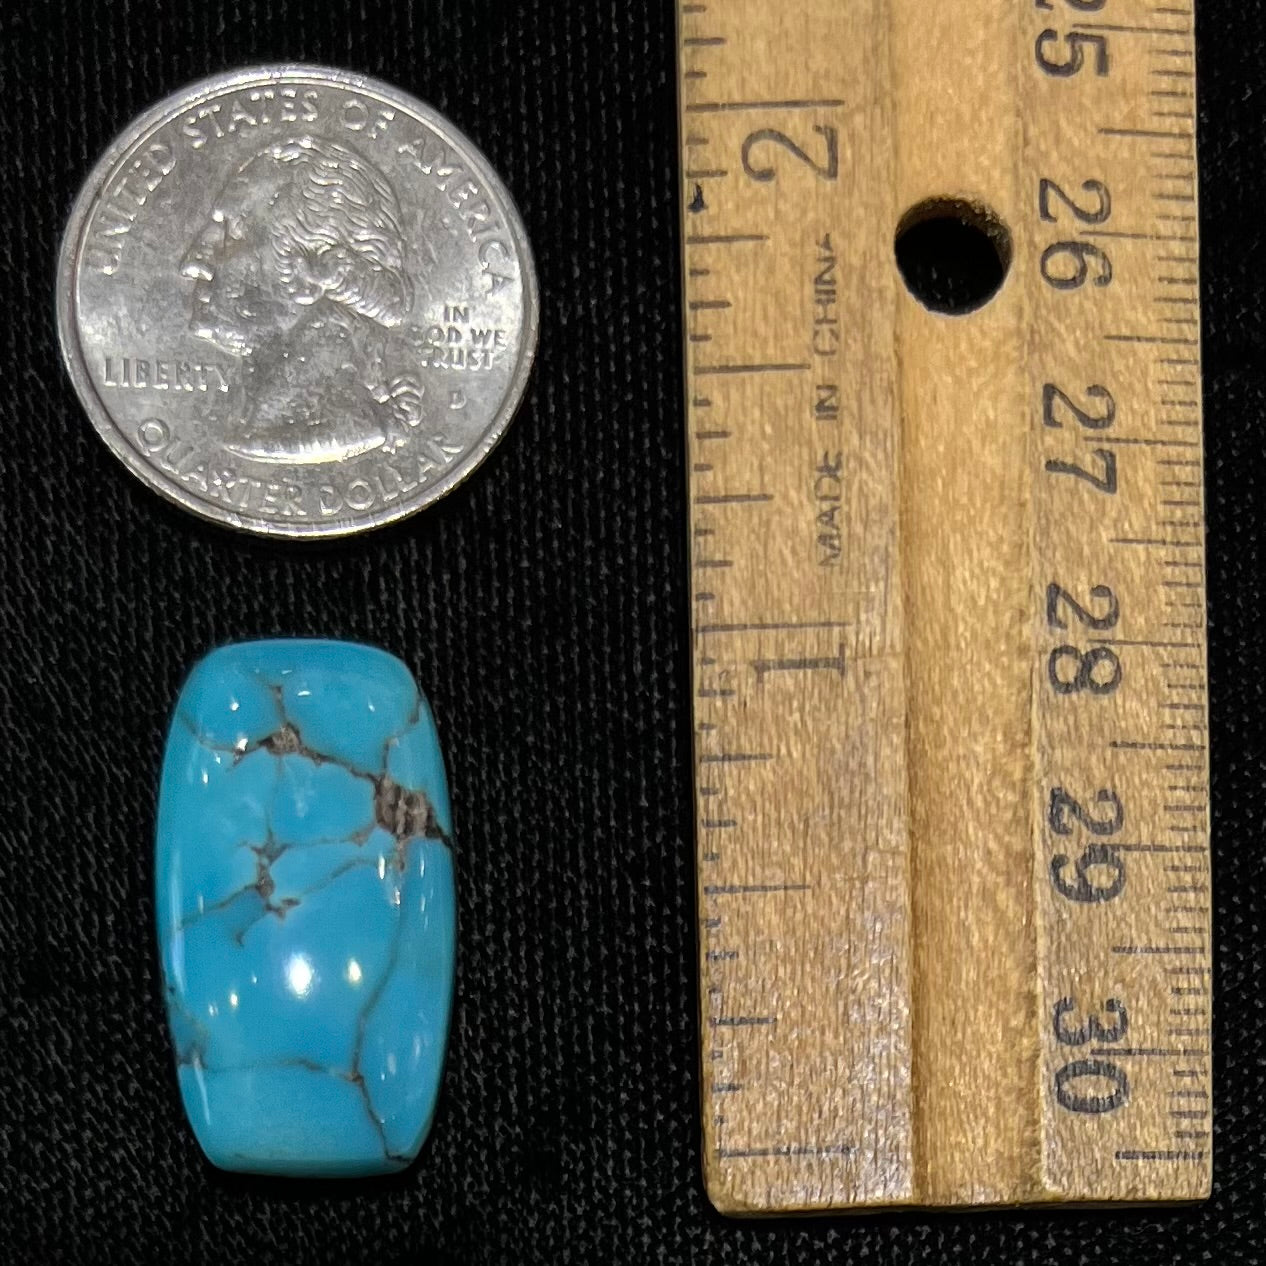 A loose, barrel cabochon cut blue turquoise stone from Burro Mountains, New Mexico.